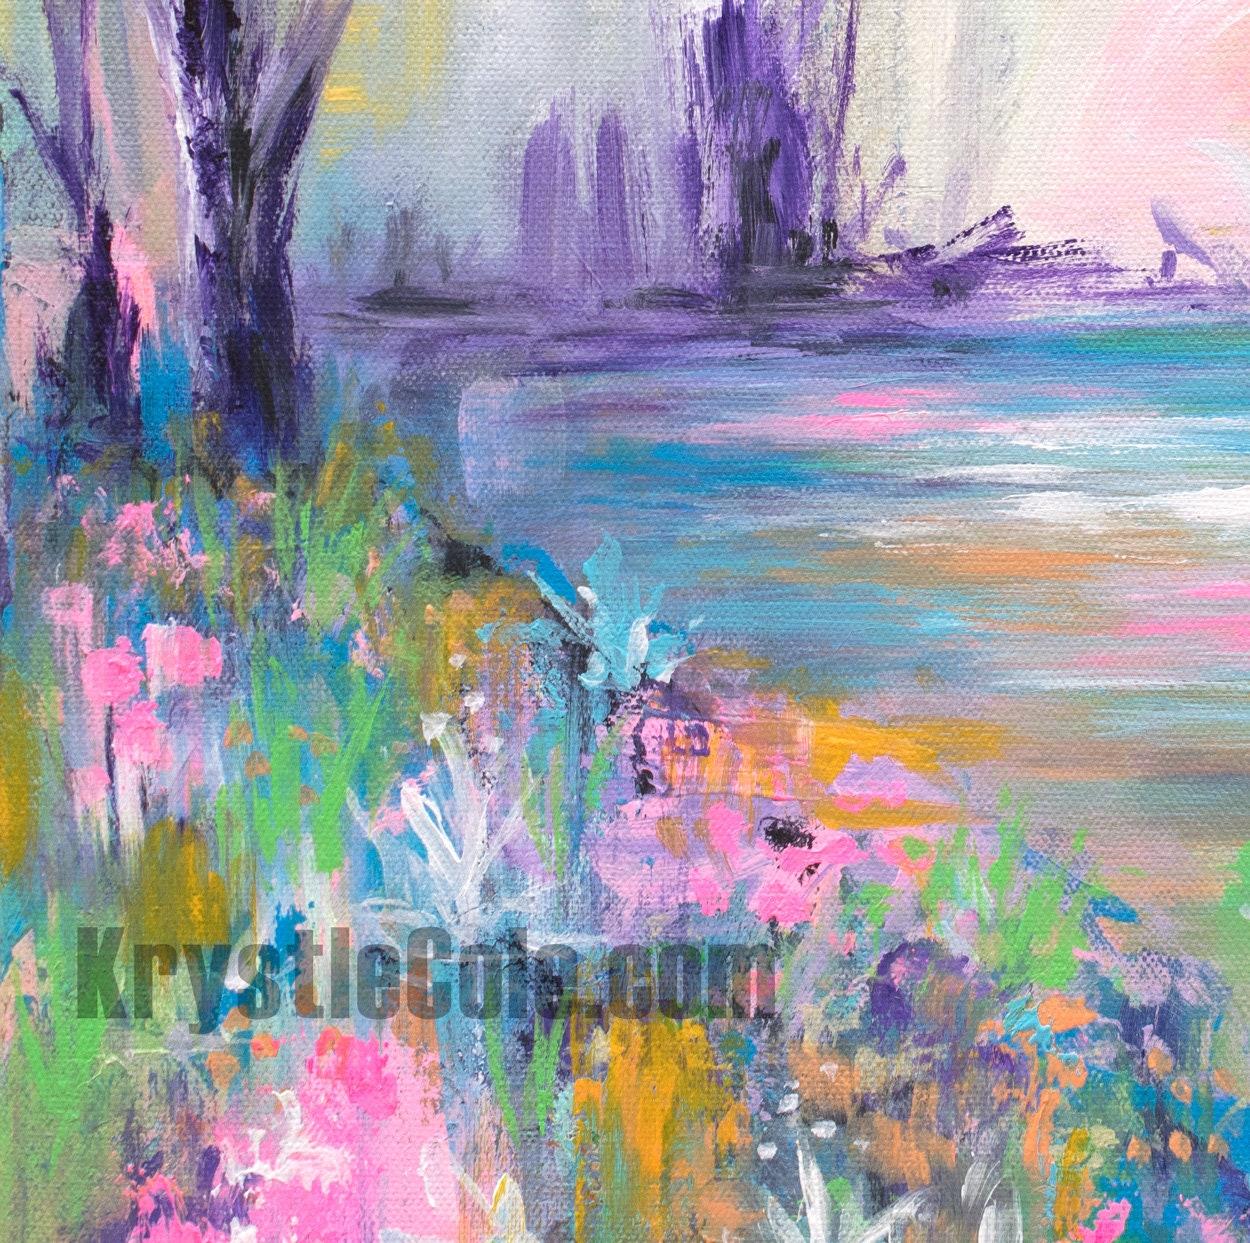 CeeCee's Creations: iridescent landscape : an abstract acrylic painting